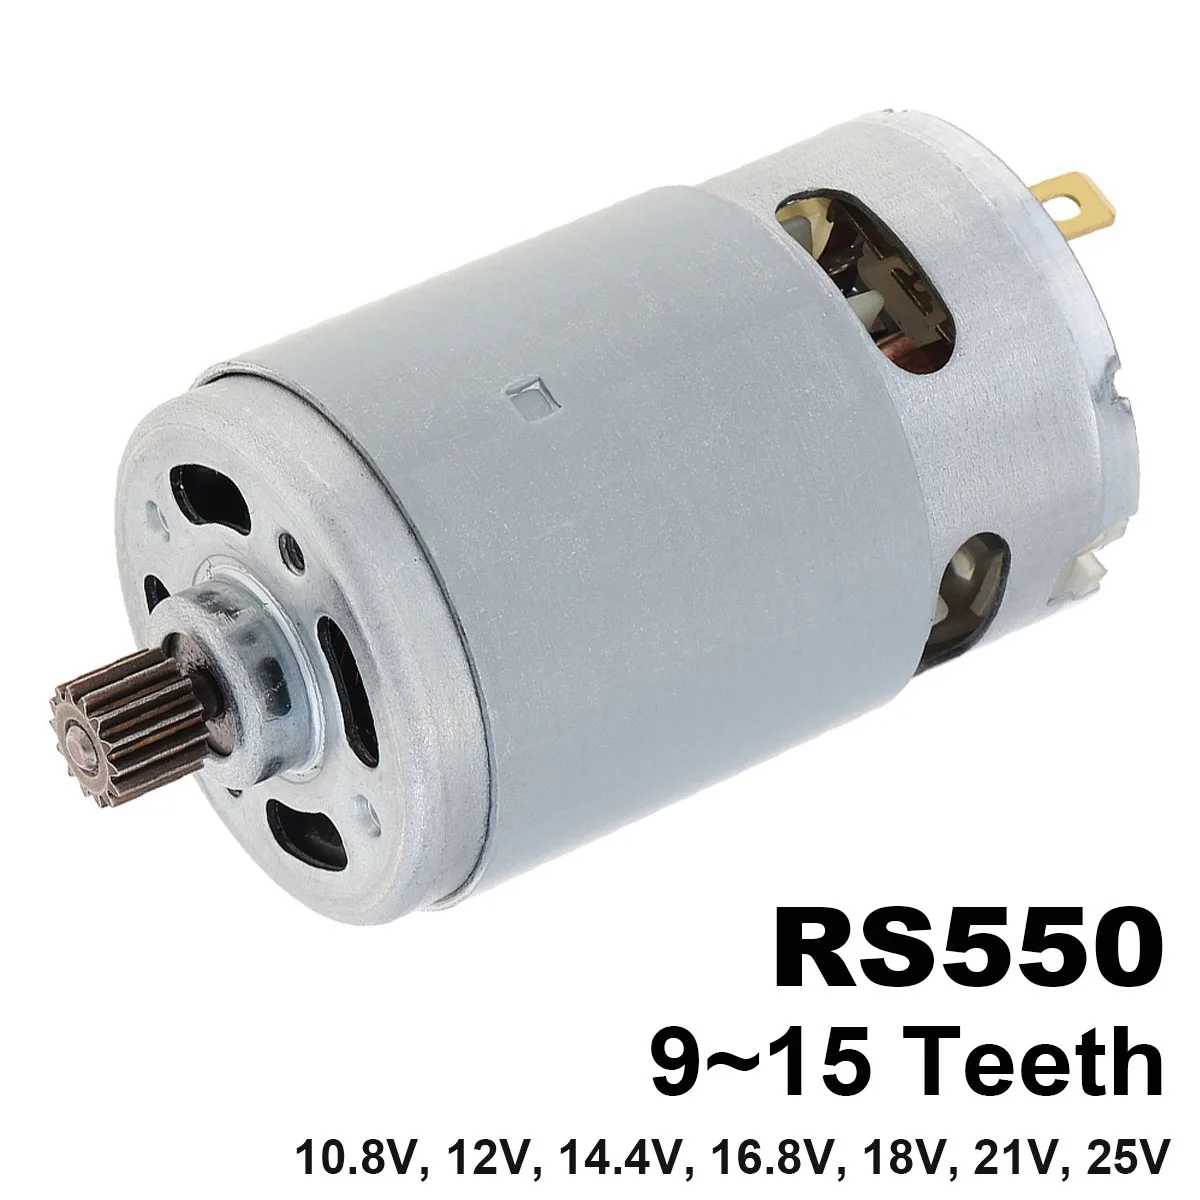 1x DC12V 11000RPM High Speed RS-550 DC Motor For DIY Robot Electric Drill Model 